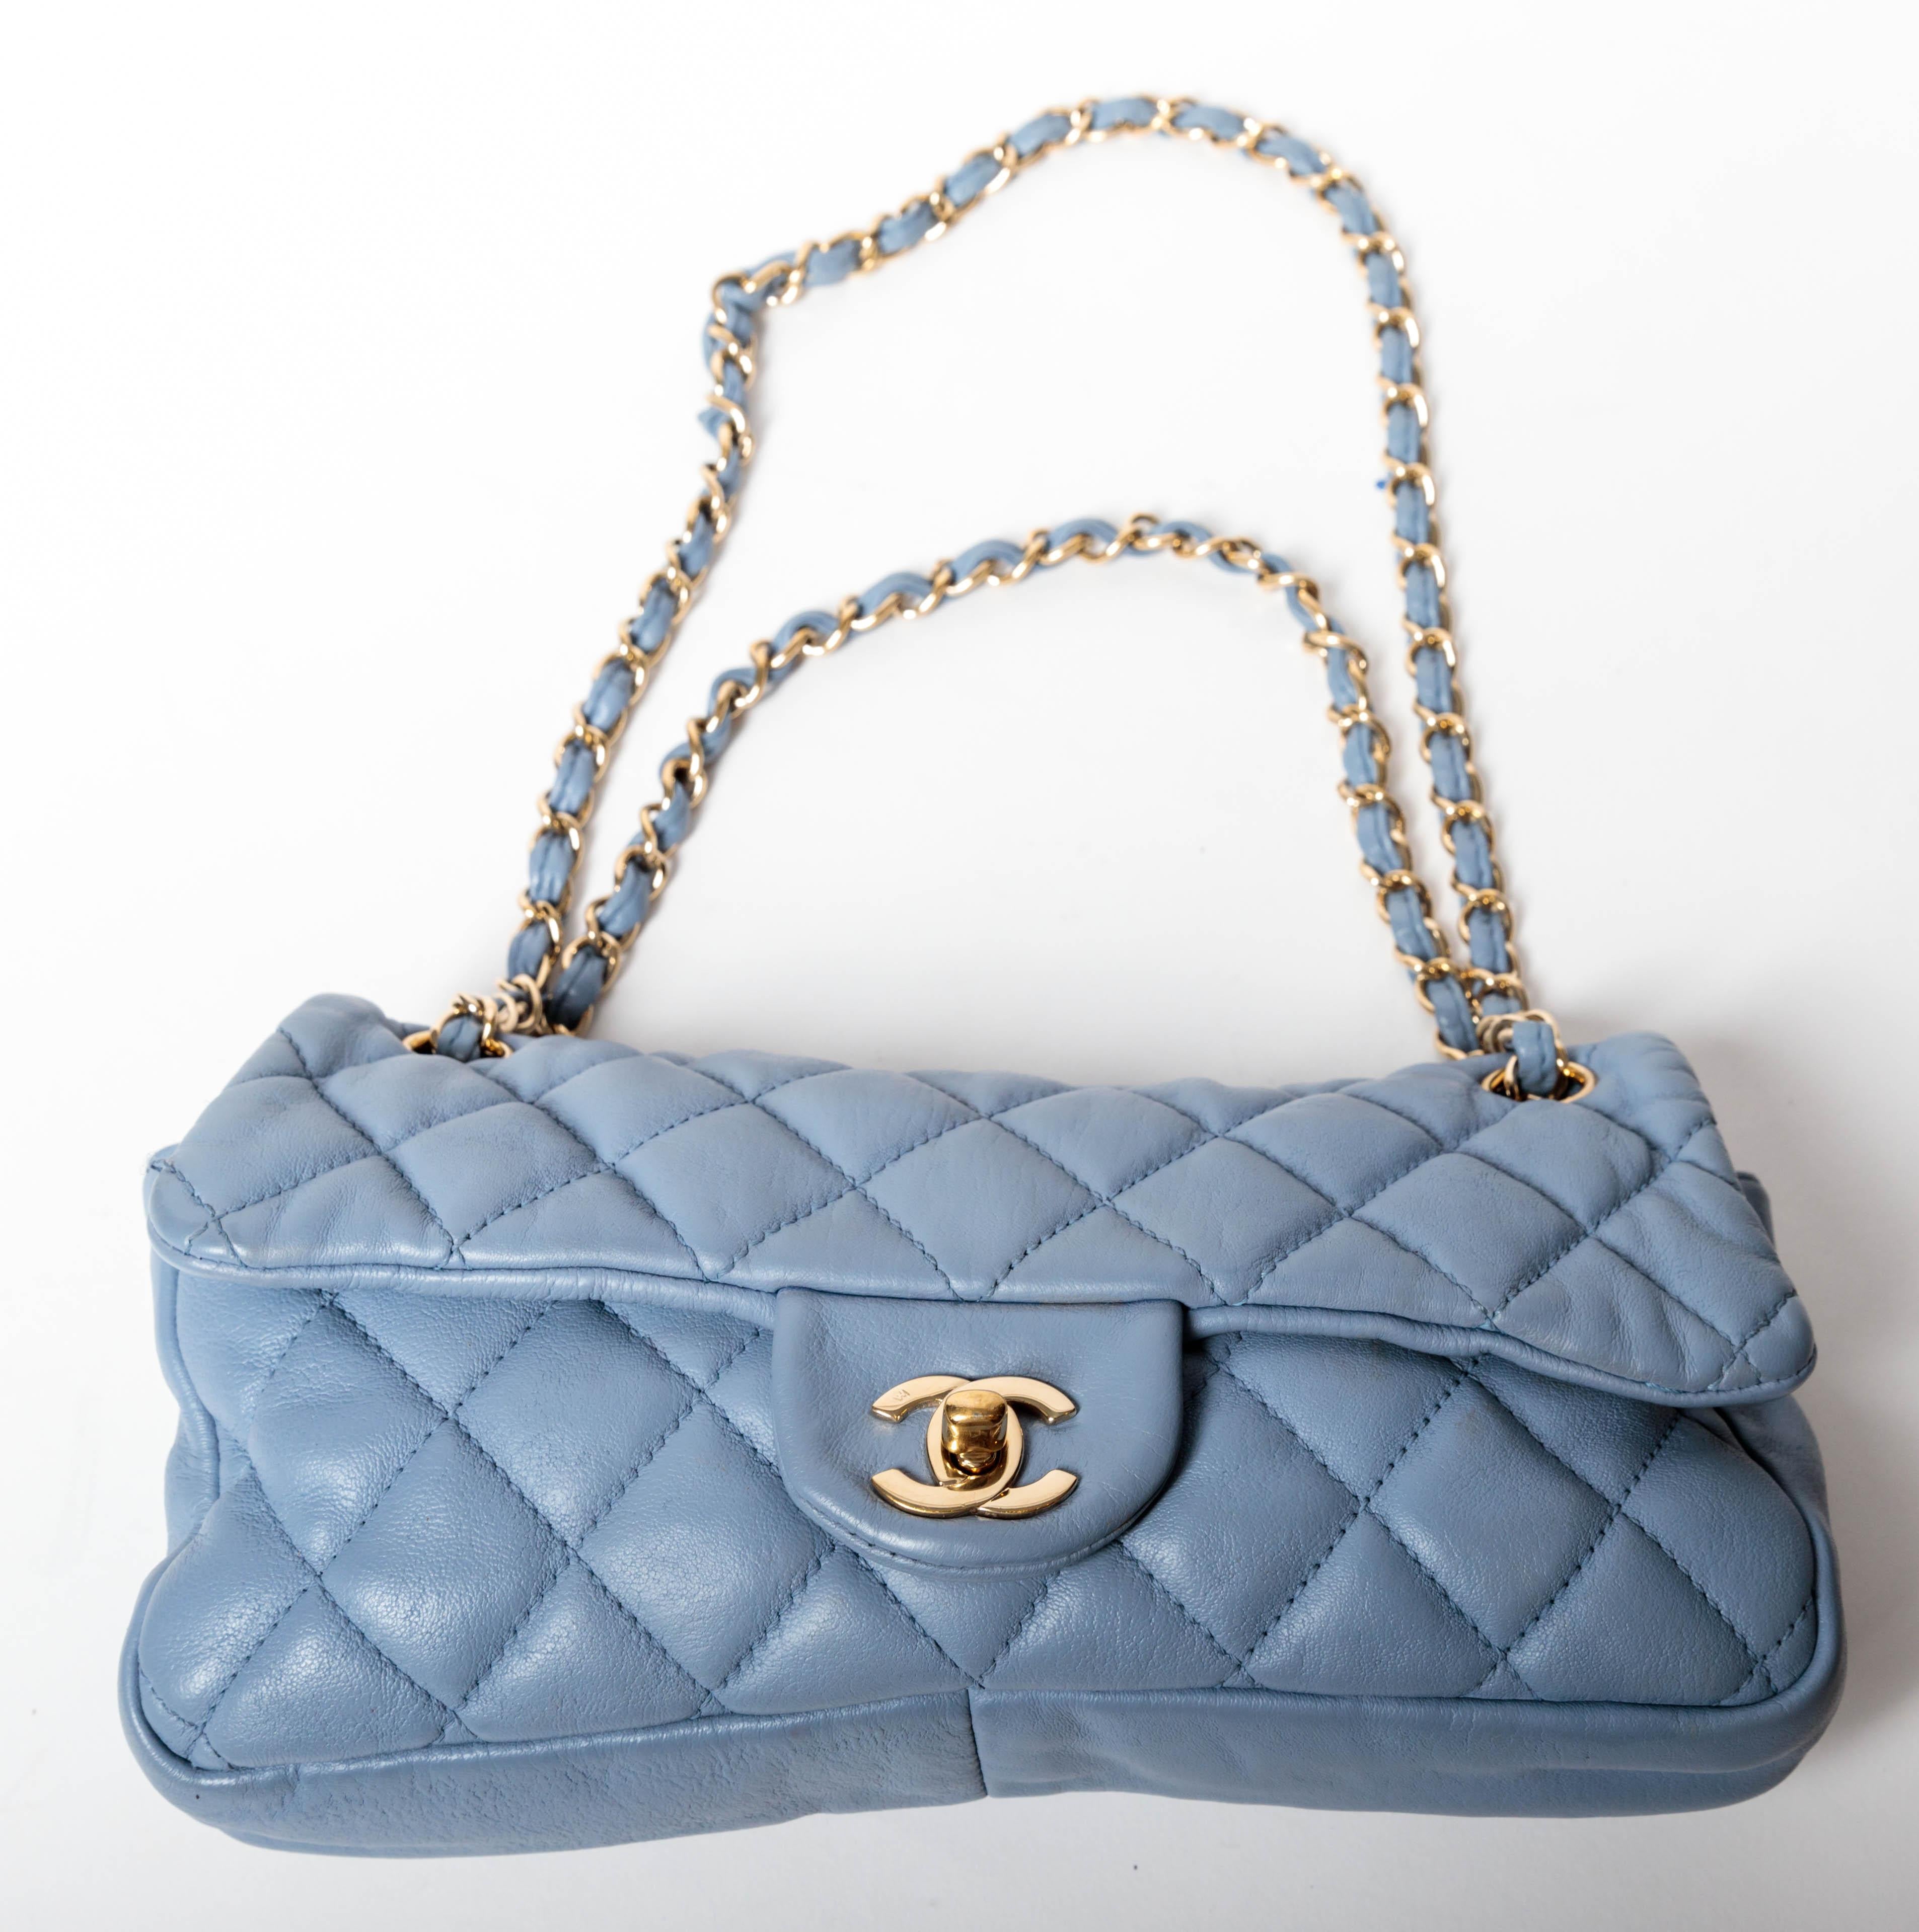 Chanel Powder Blue Single Flap with Gold Hardware - 2005 - 2006 Collection For Sale 3